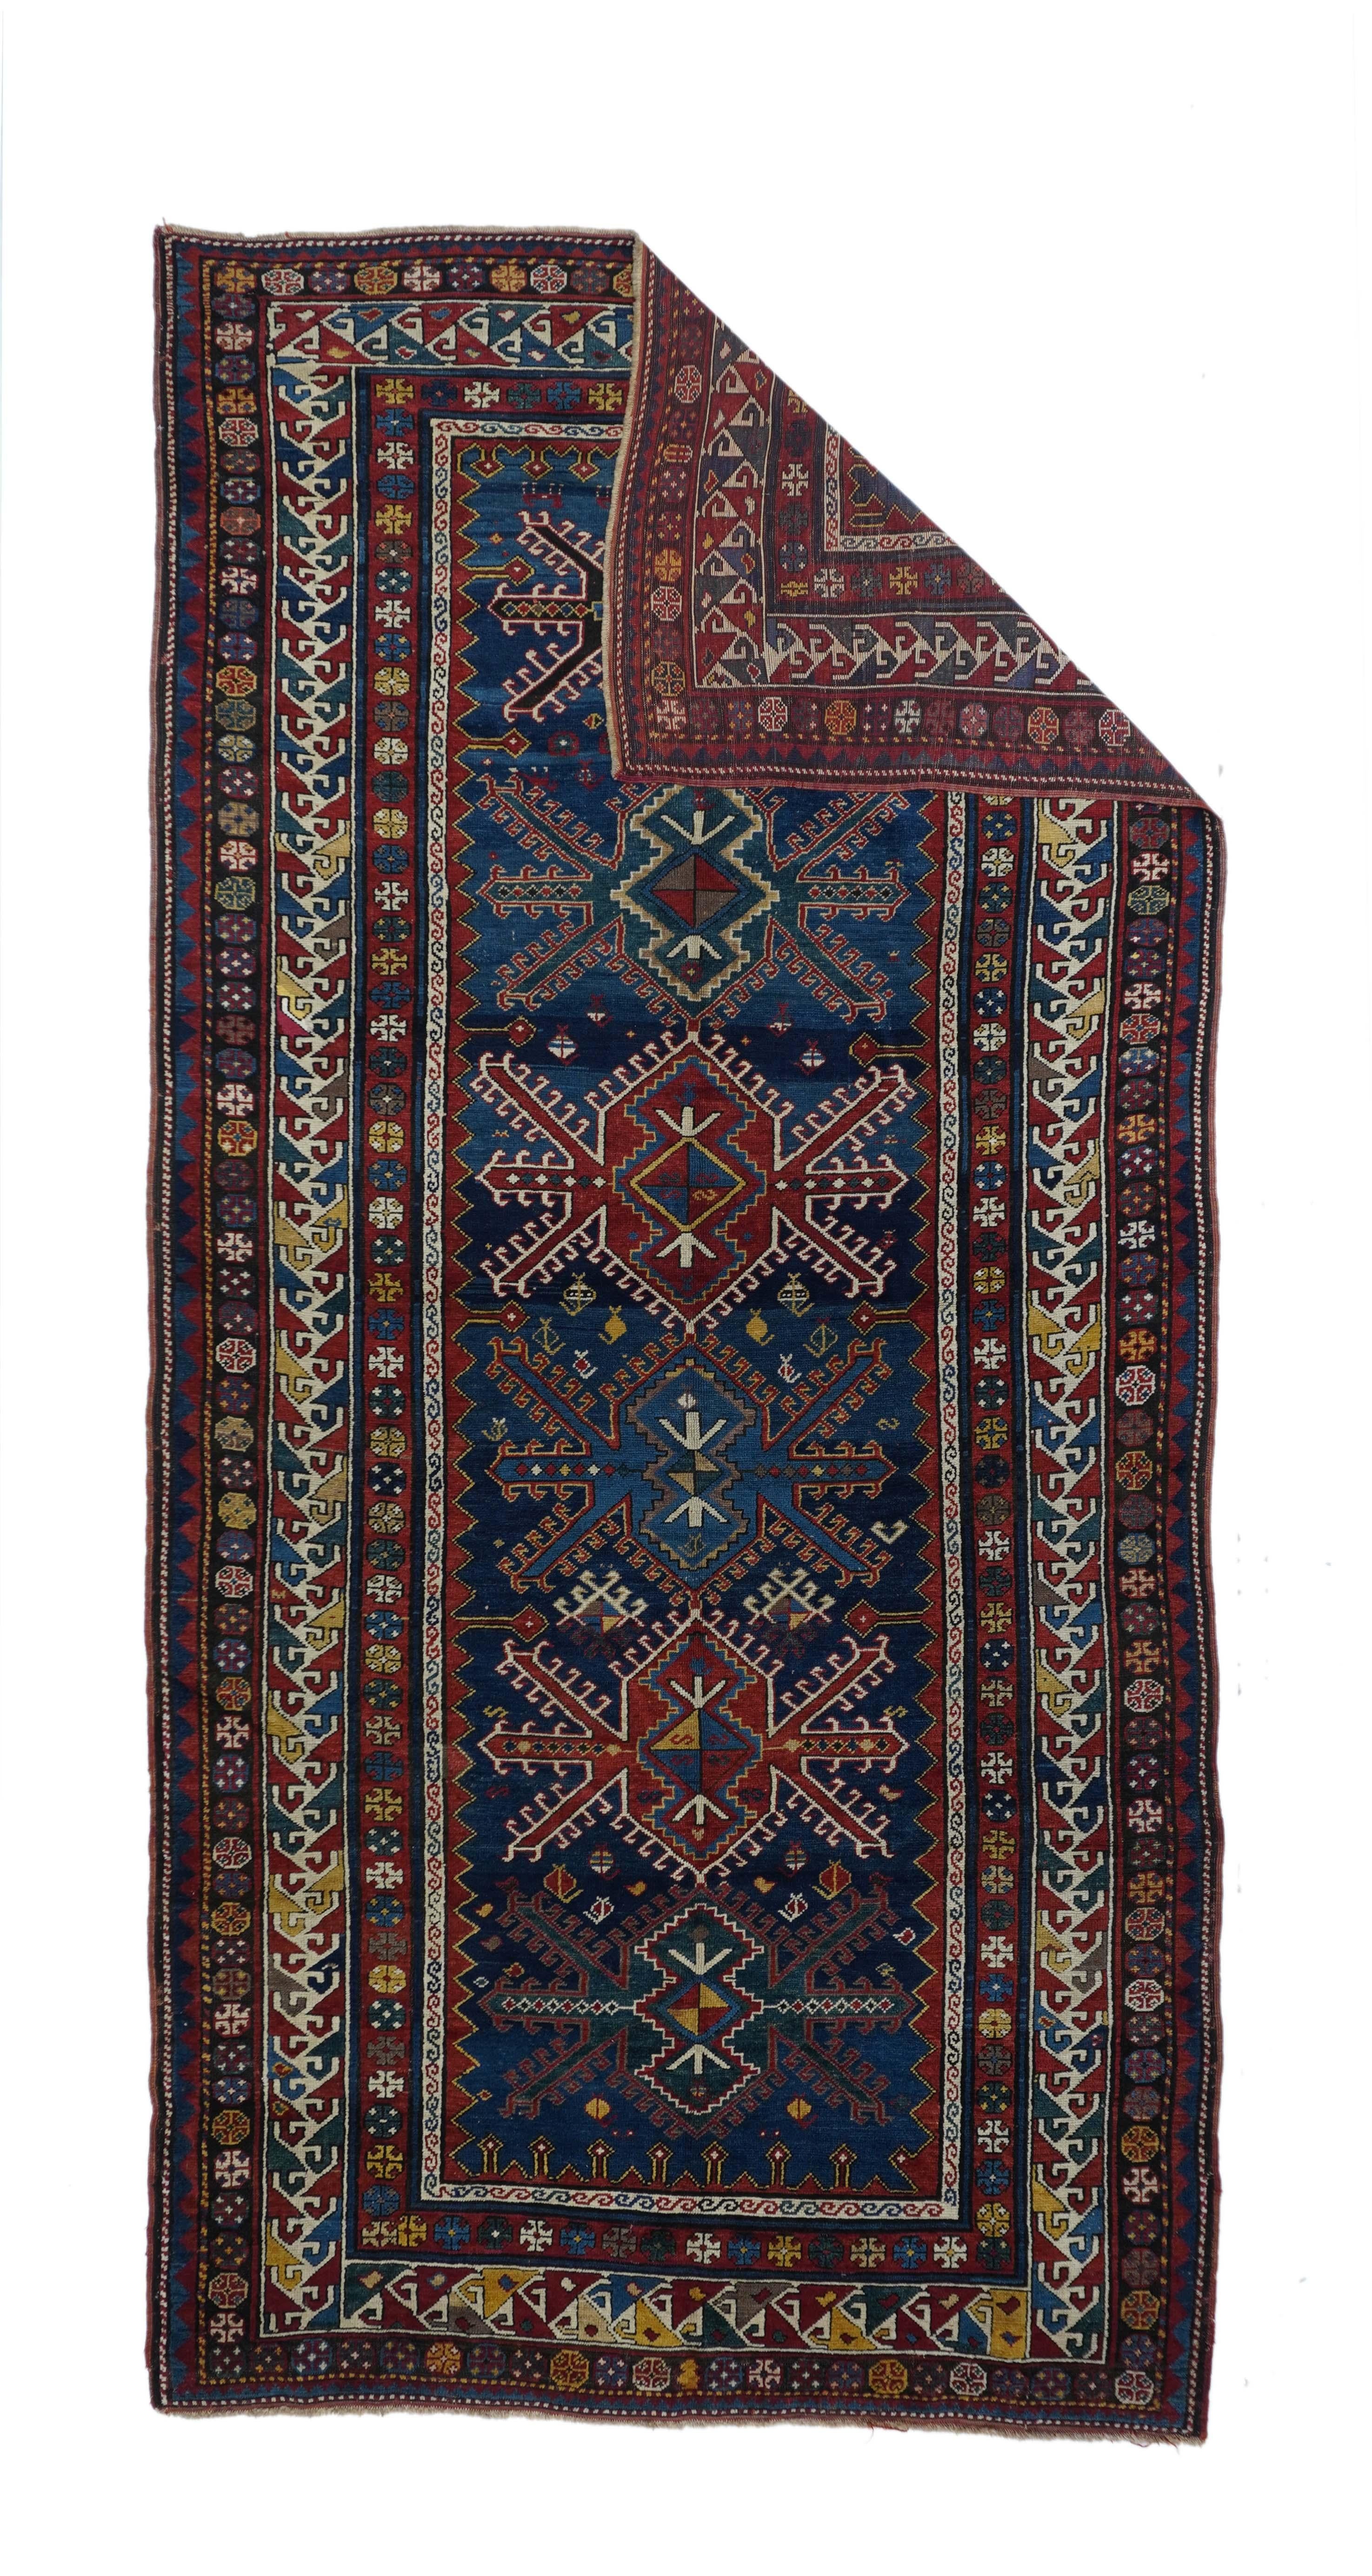 Antique Kazak Rug 5'7'' x 11'11''. This large Kazak (long rug) on wool, with a moderate weave, features a well-abrashed dark blue field presenting six Turkmen-style medallions in red and medium blue, and uniformly edged with hooks. Zig-zag red